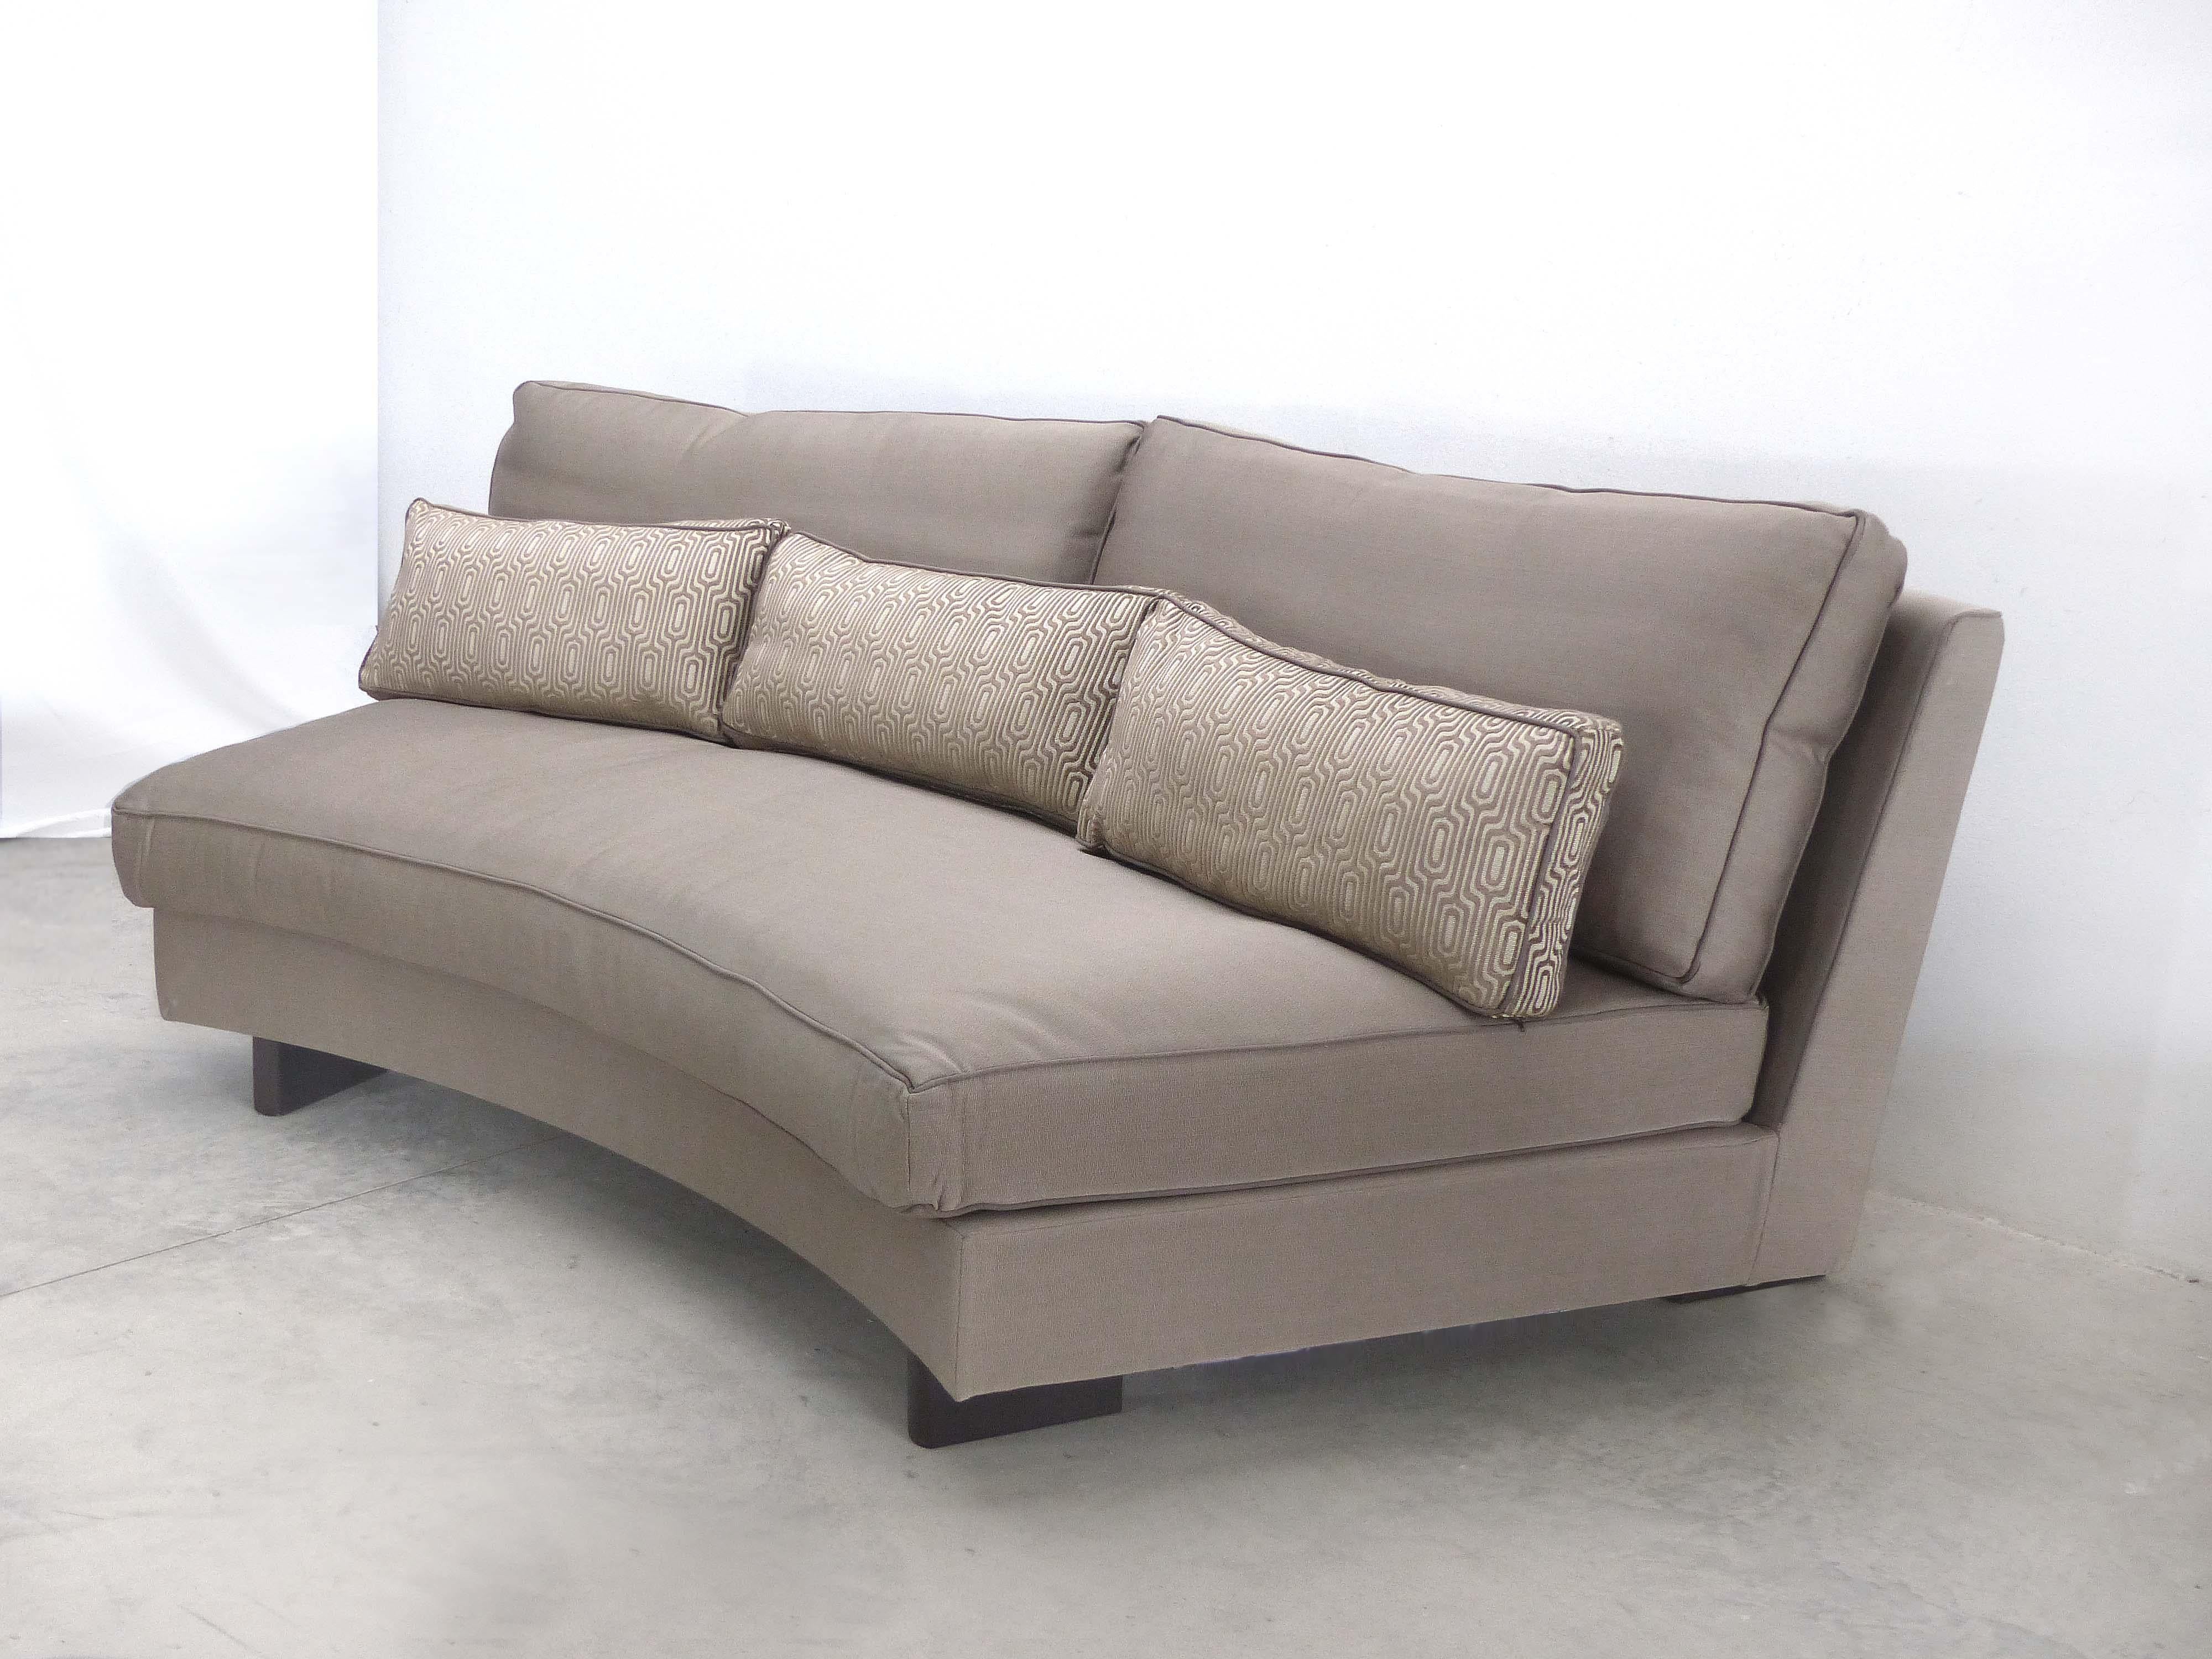 Umberto Asnago Mobilidea Semi-circular Sectional Sofa, Italy

Offered for sale is a large semi-circular sectional sofa in three pieces designed by Umberto Asnago for Mobilidea, Italy. The measurements provided are for each section, with a total